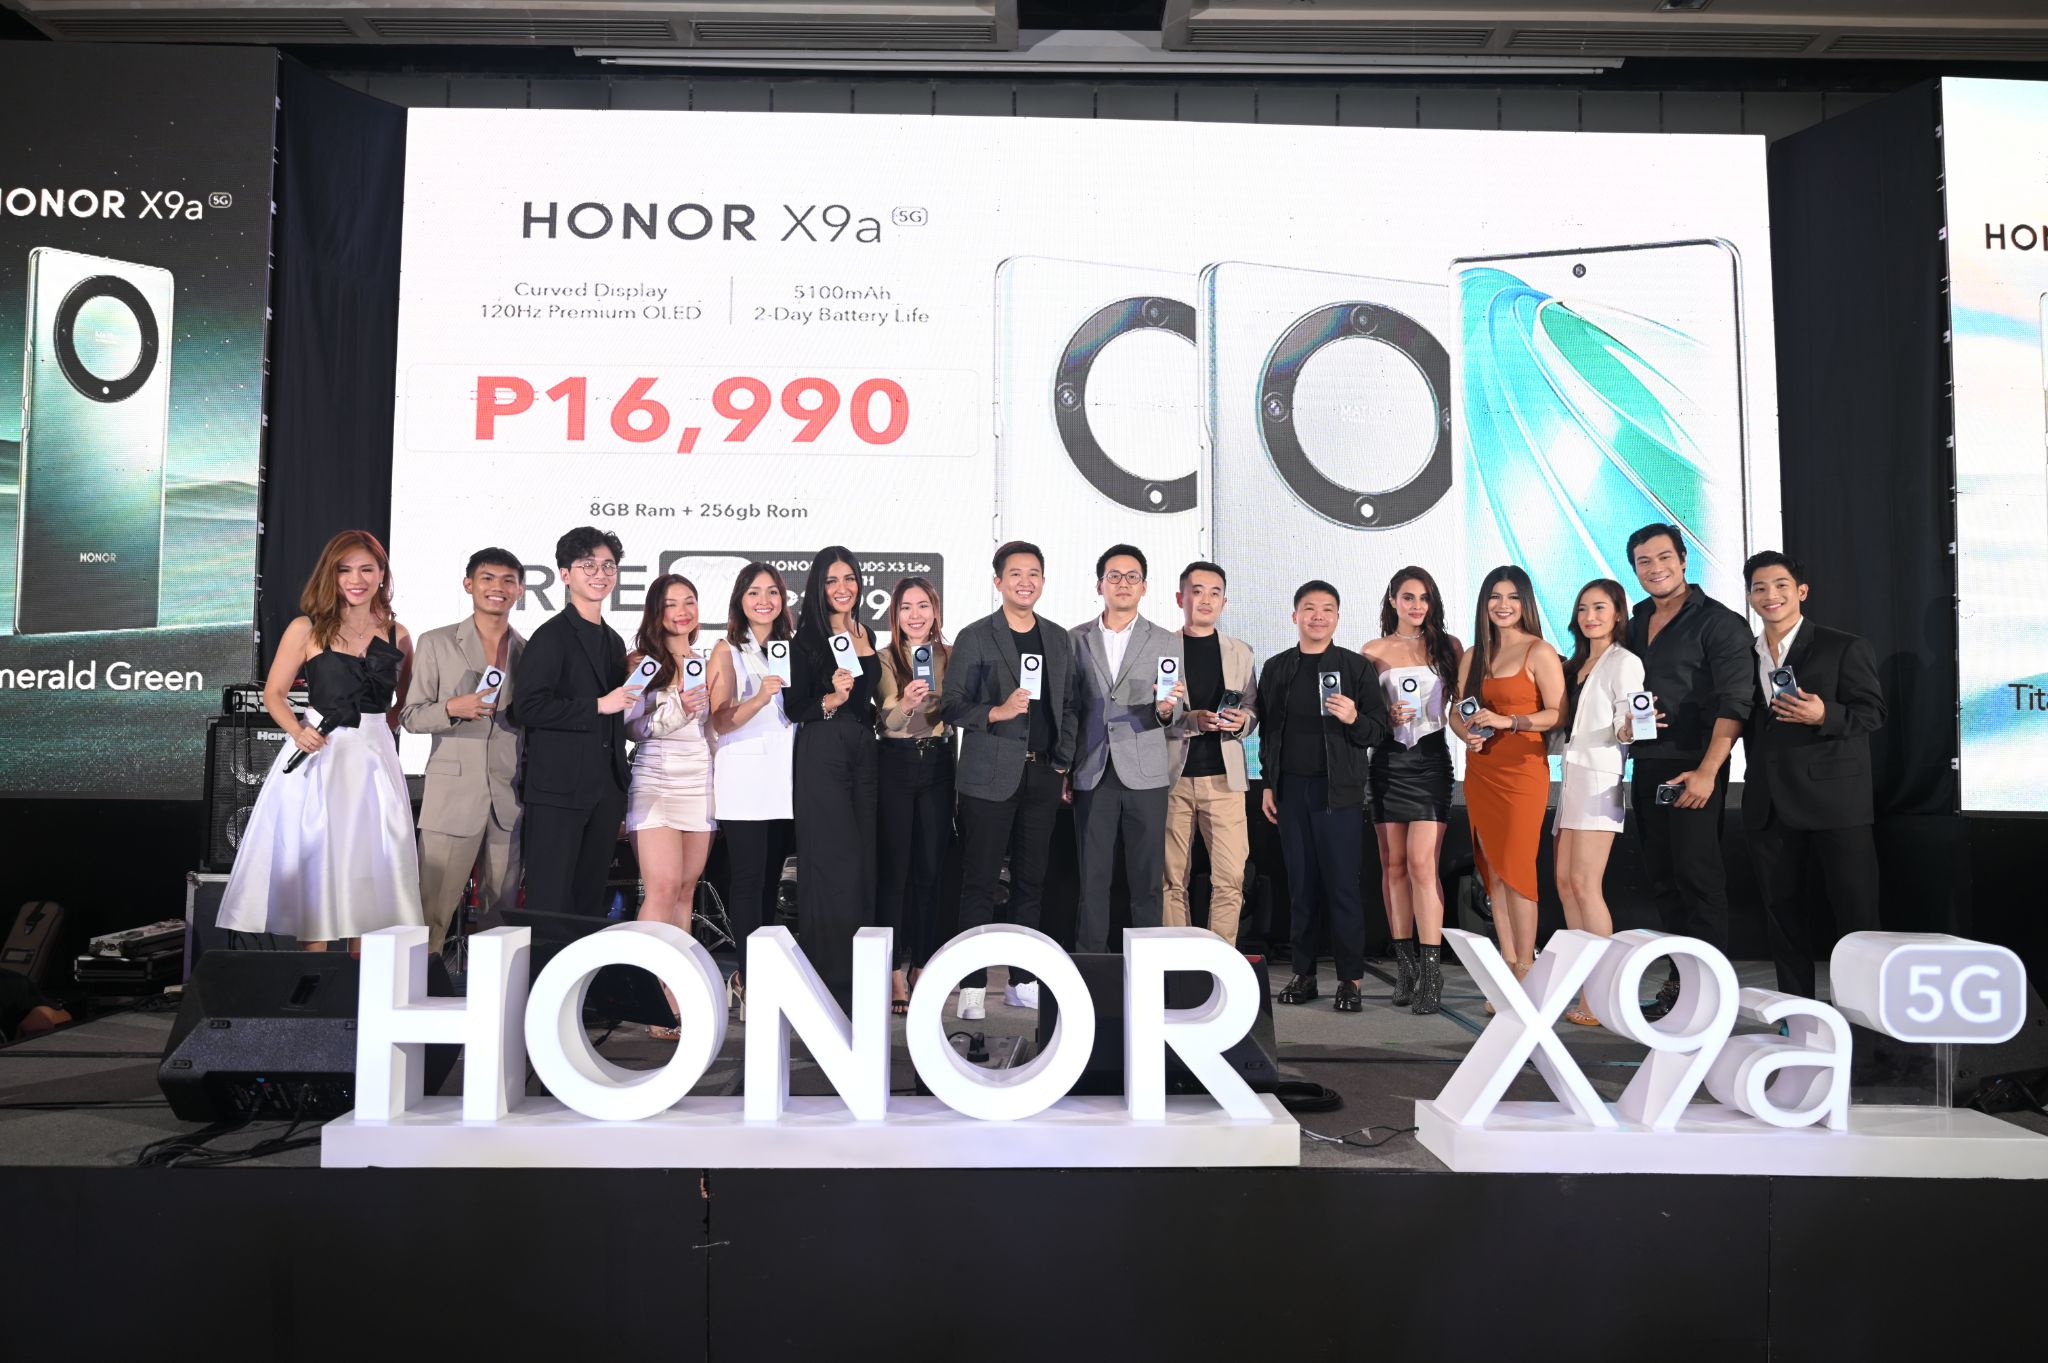 Ultra tough HONOR X9a 5G gets tested in an experiential launch in the Philippines, priced at Php 16,990